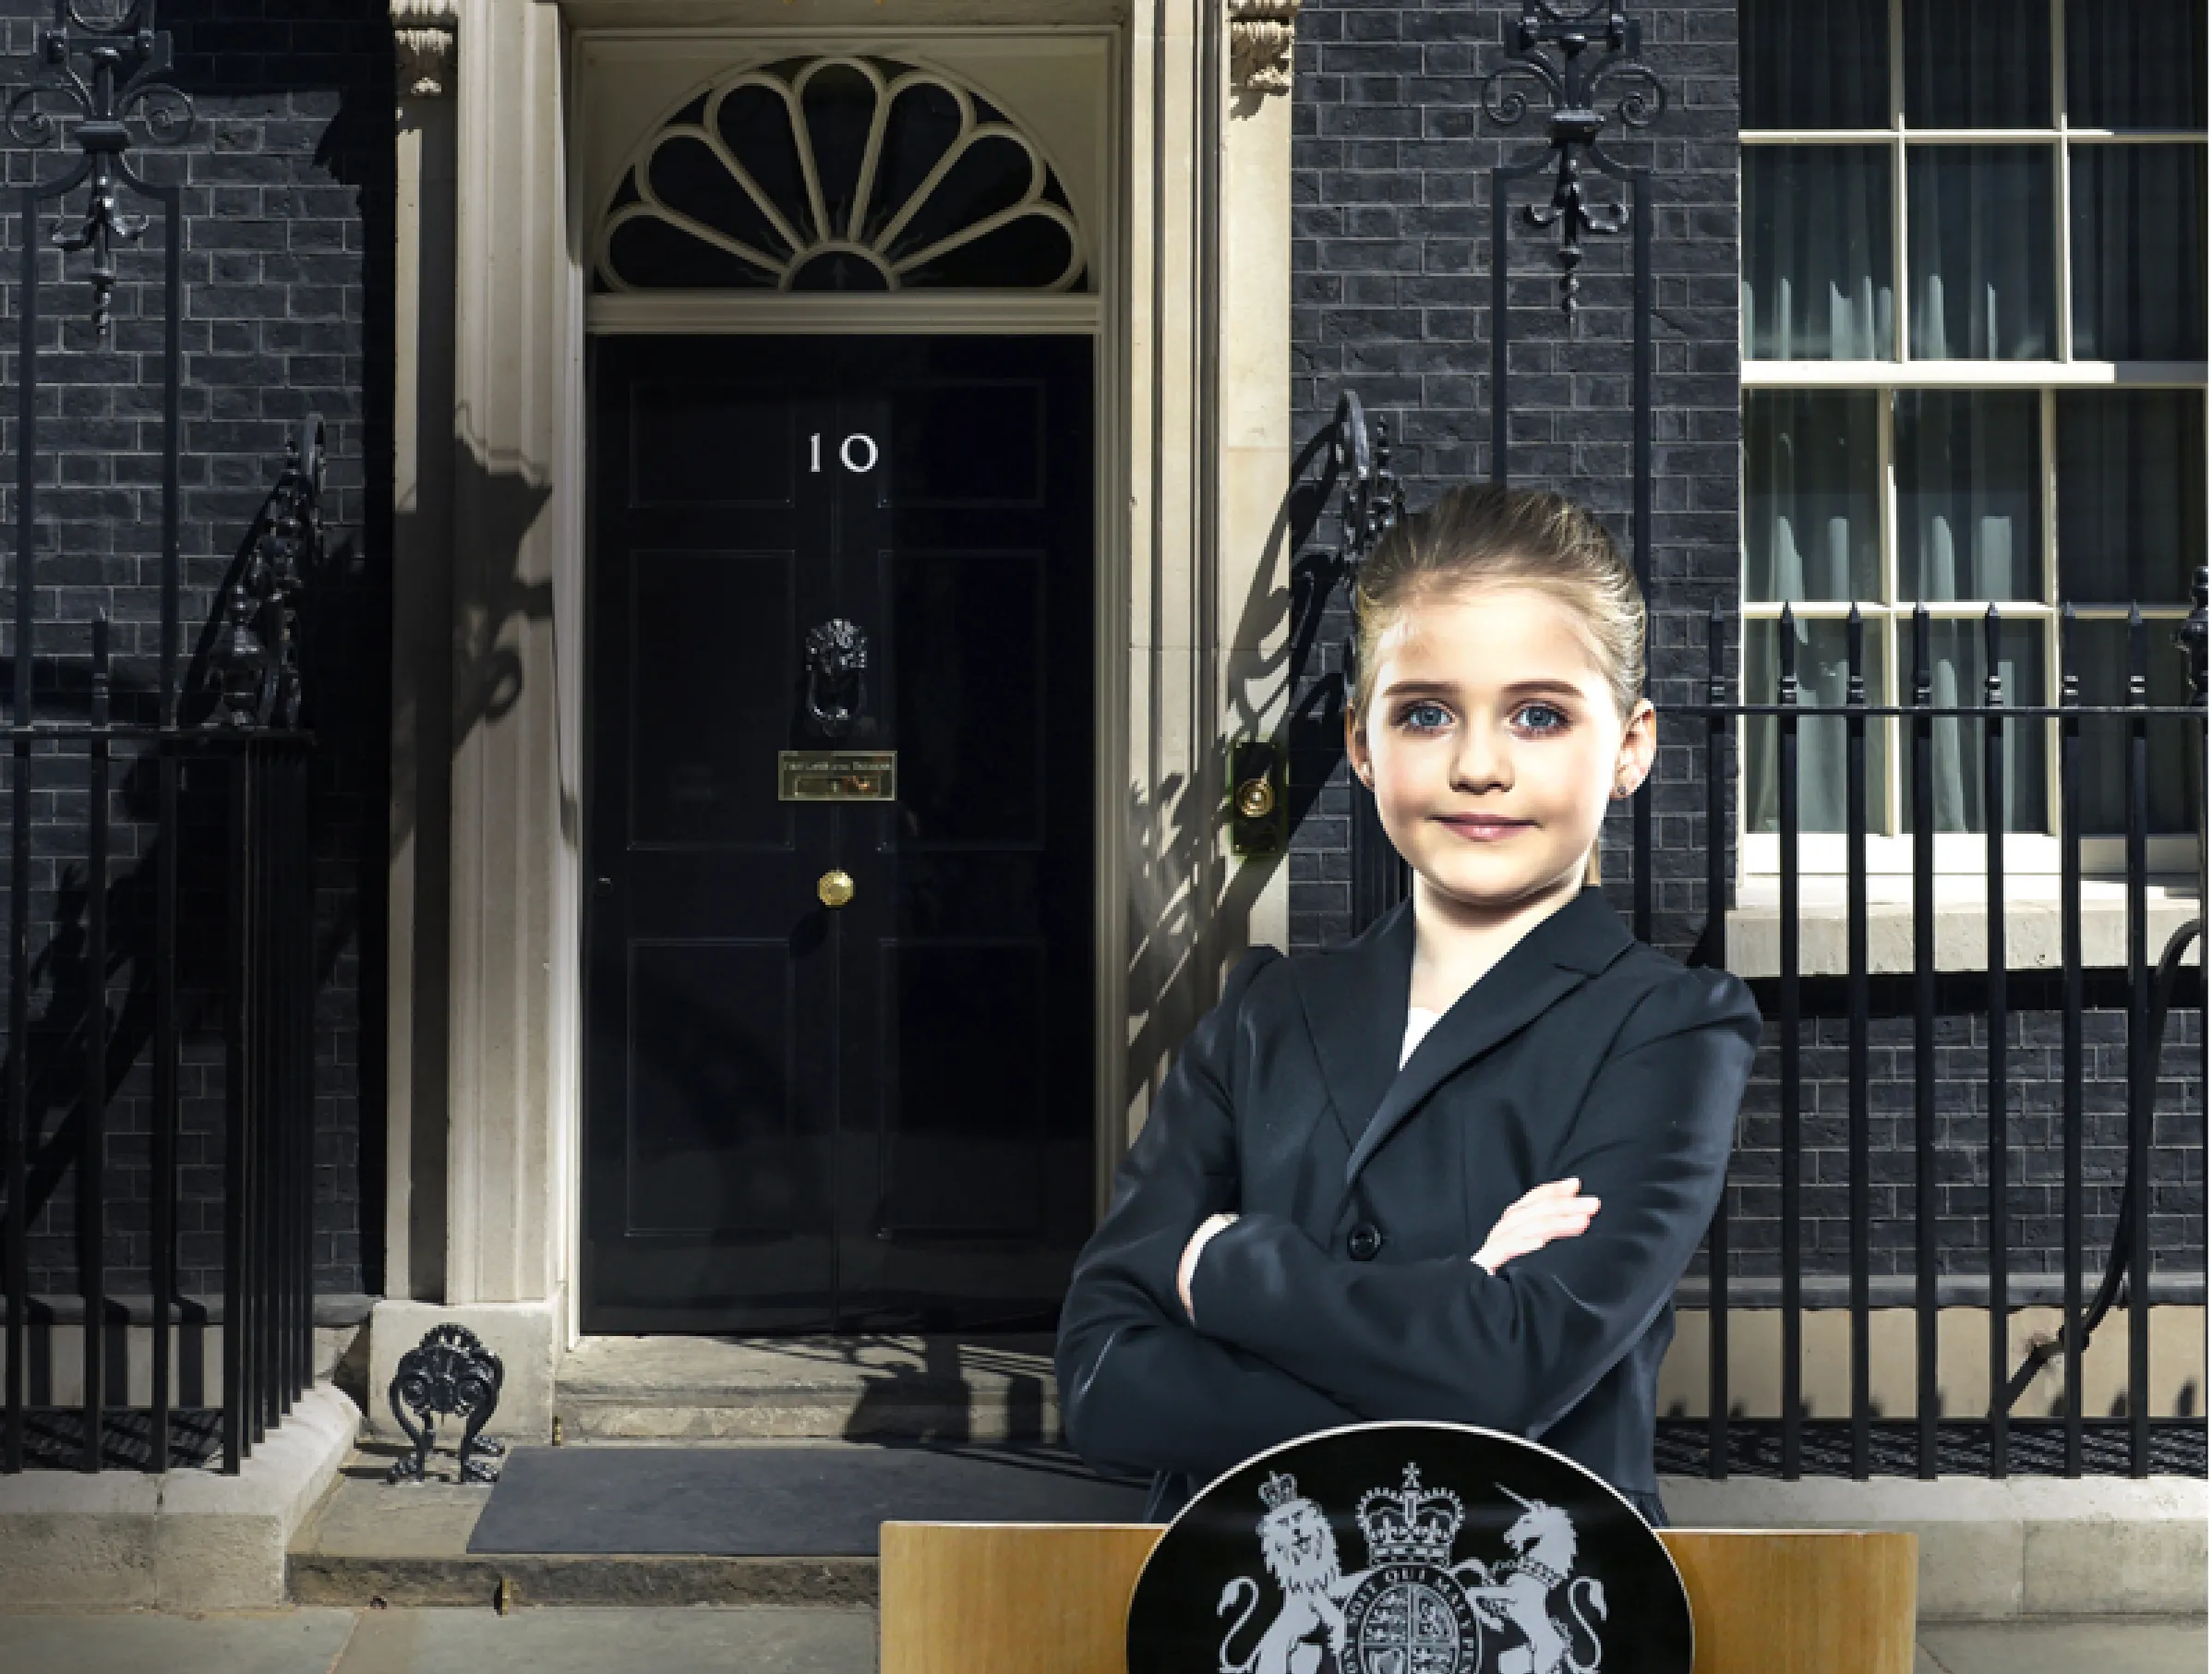 Teach First "Challenge the Impossible" campaign image showing a young girl standing by a lectern outside 10 Downing Street. She has her arms folded and is smiling, looking powerful